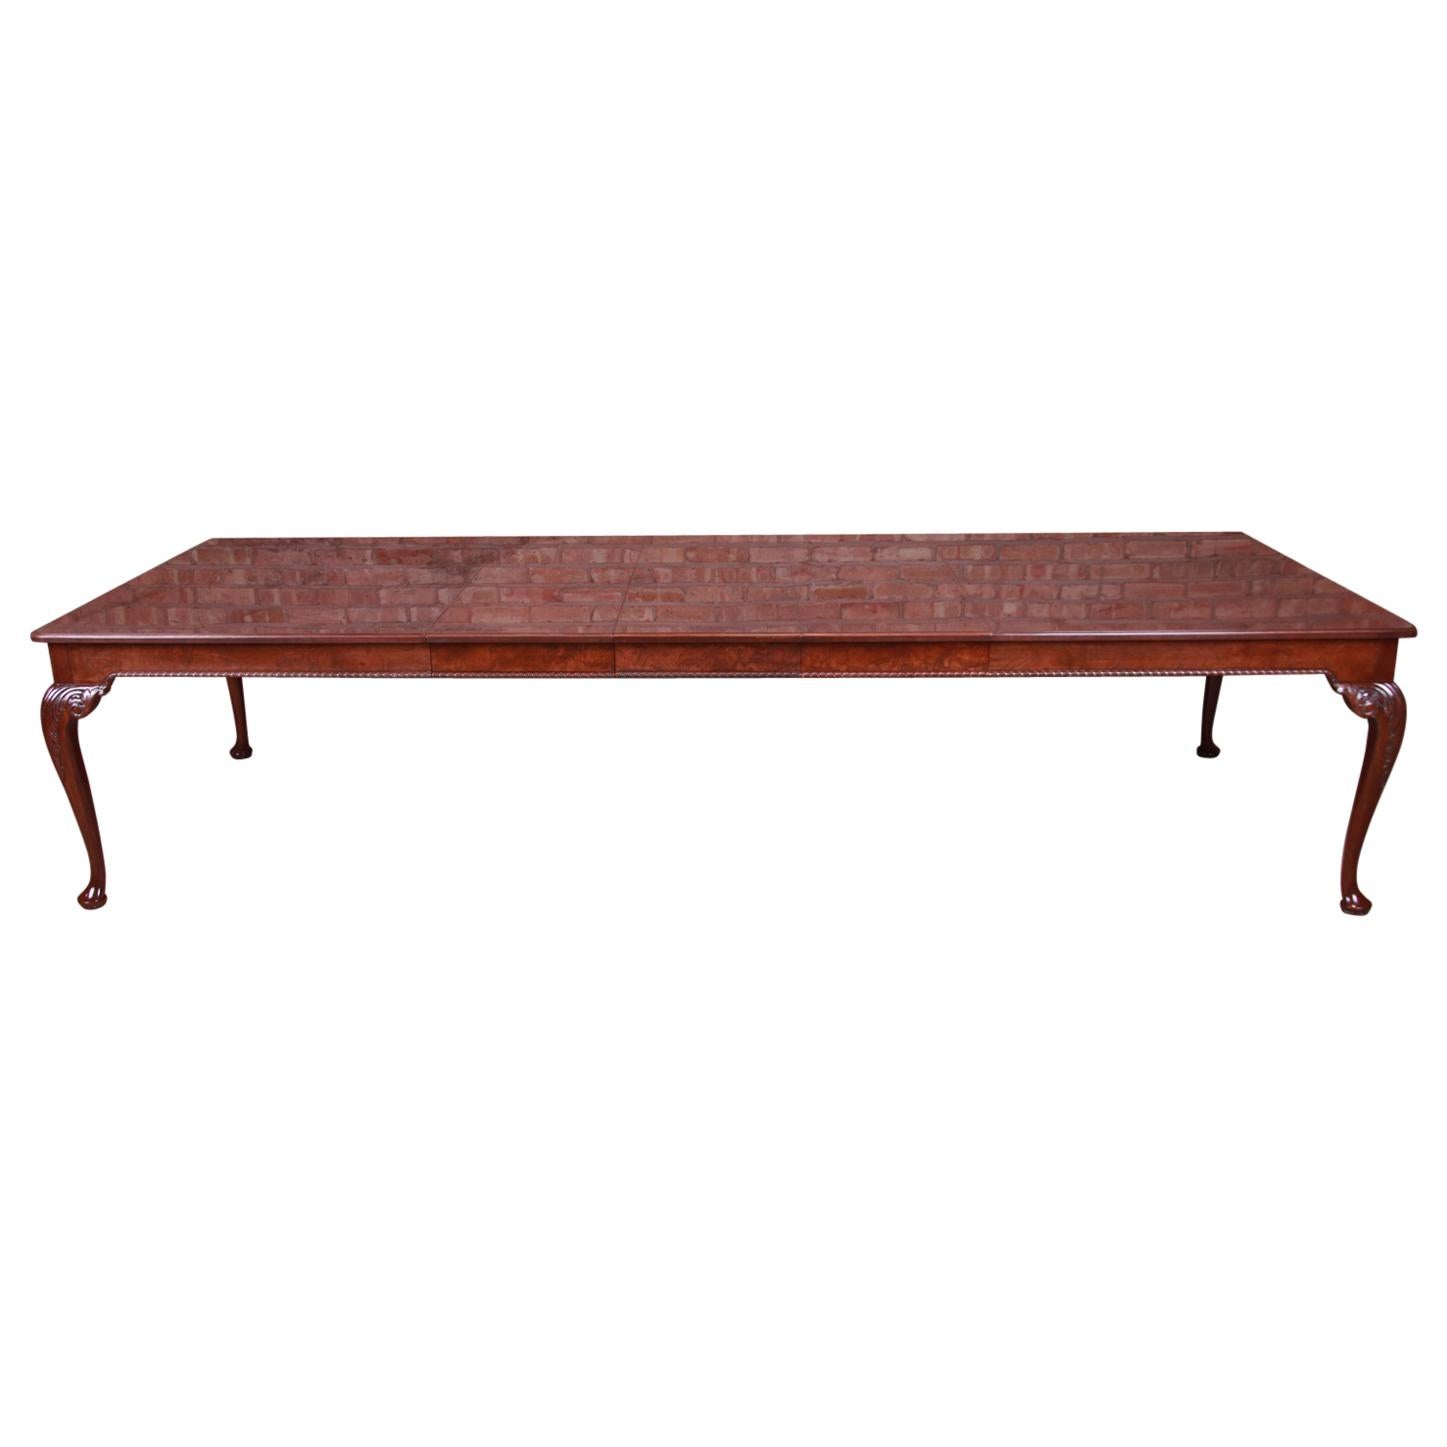 Baker Furniture Stately Homes Queen Anne Walnut Dining Table, Newly Refinished